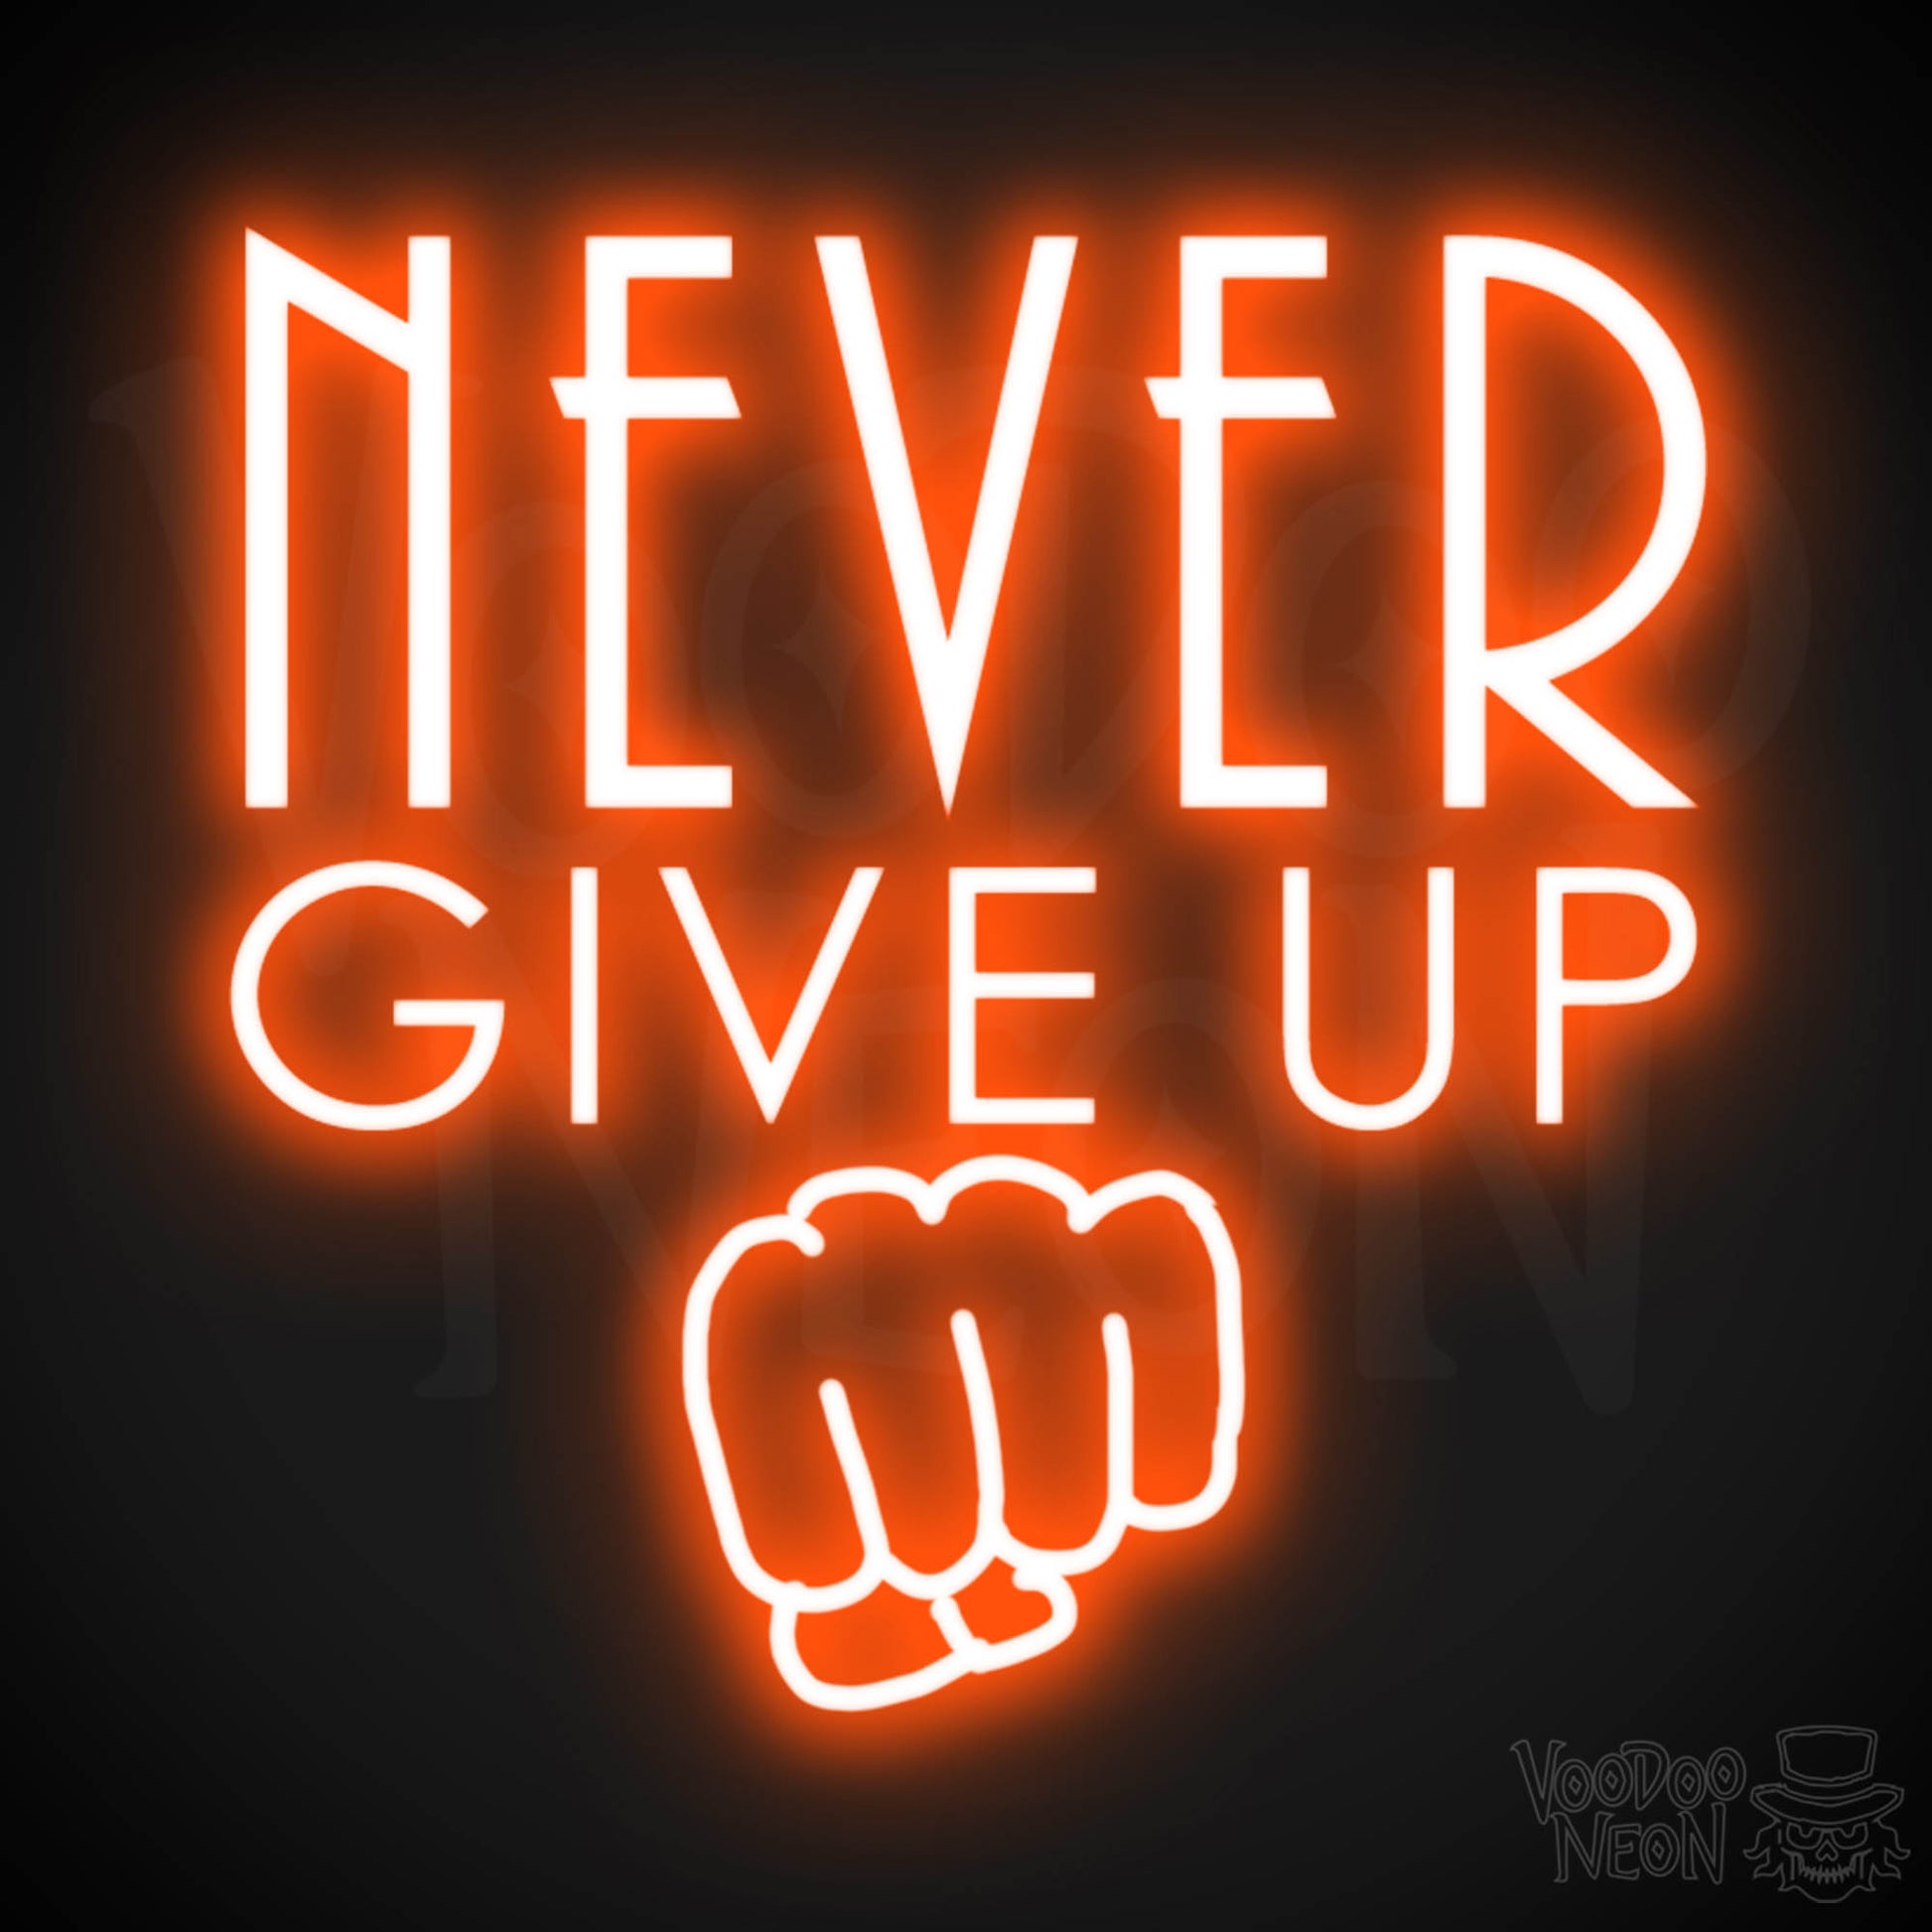 Never Give Up Neon Sign - Neon Never Give Up Sign - LED Sign - Color Orange